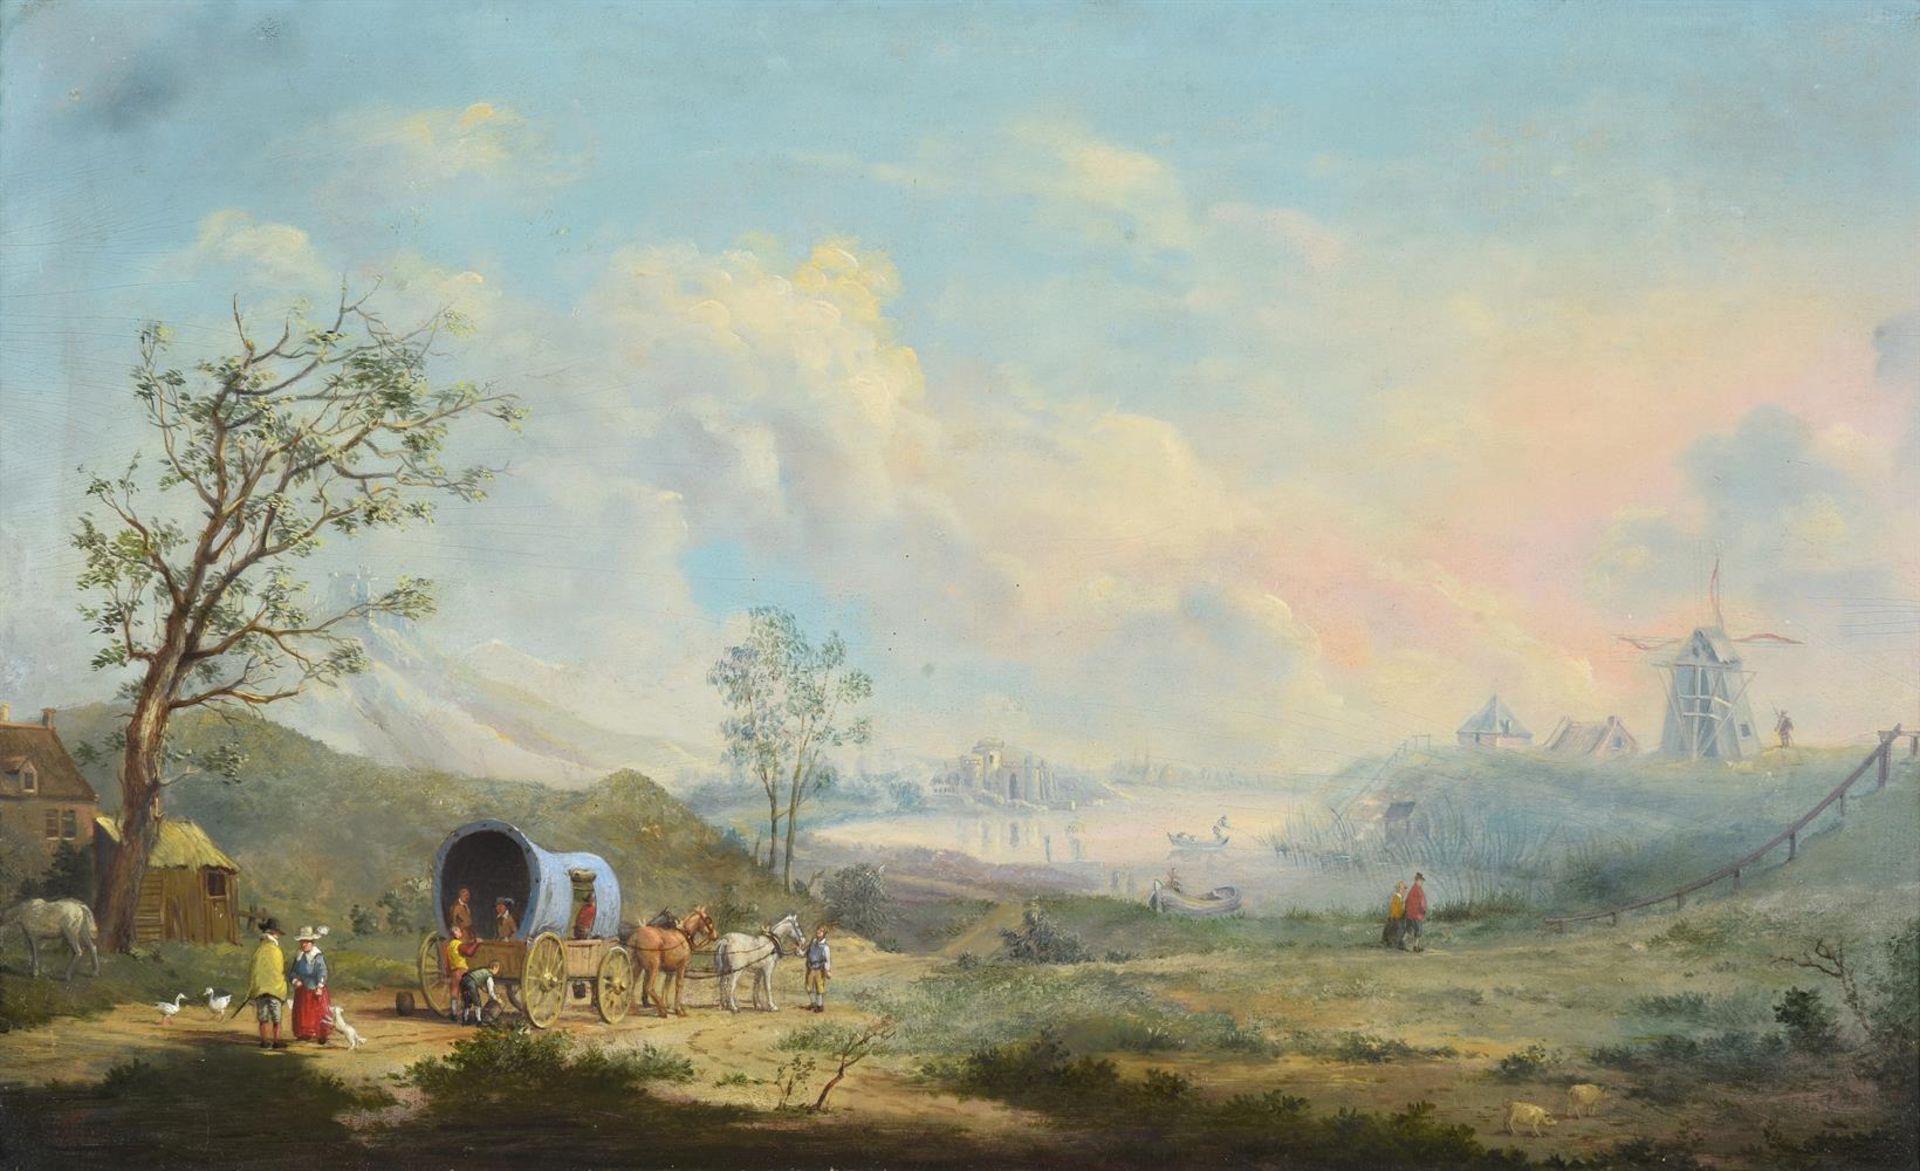 ENGLISH SCHOOL (18TH CENTURY), TRAVELLERS ON A TRACK WITH A CARAVAN BY A WINDMILL